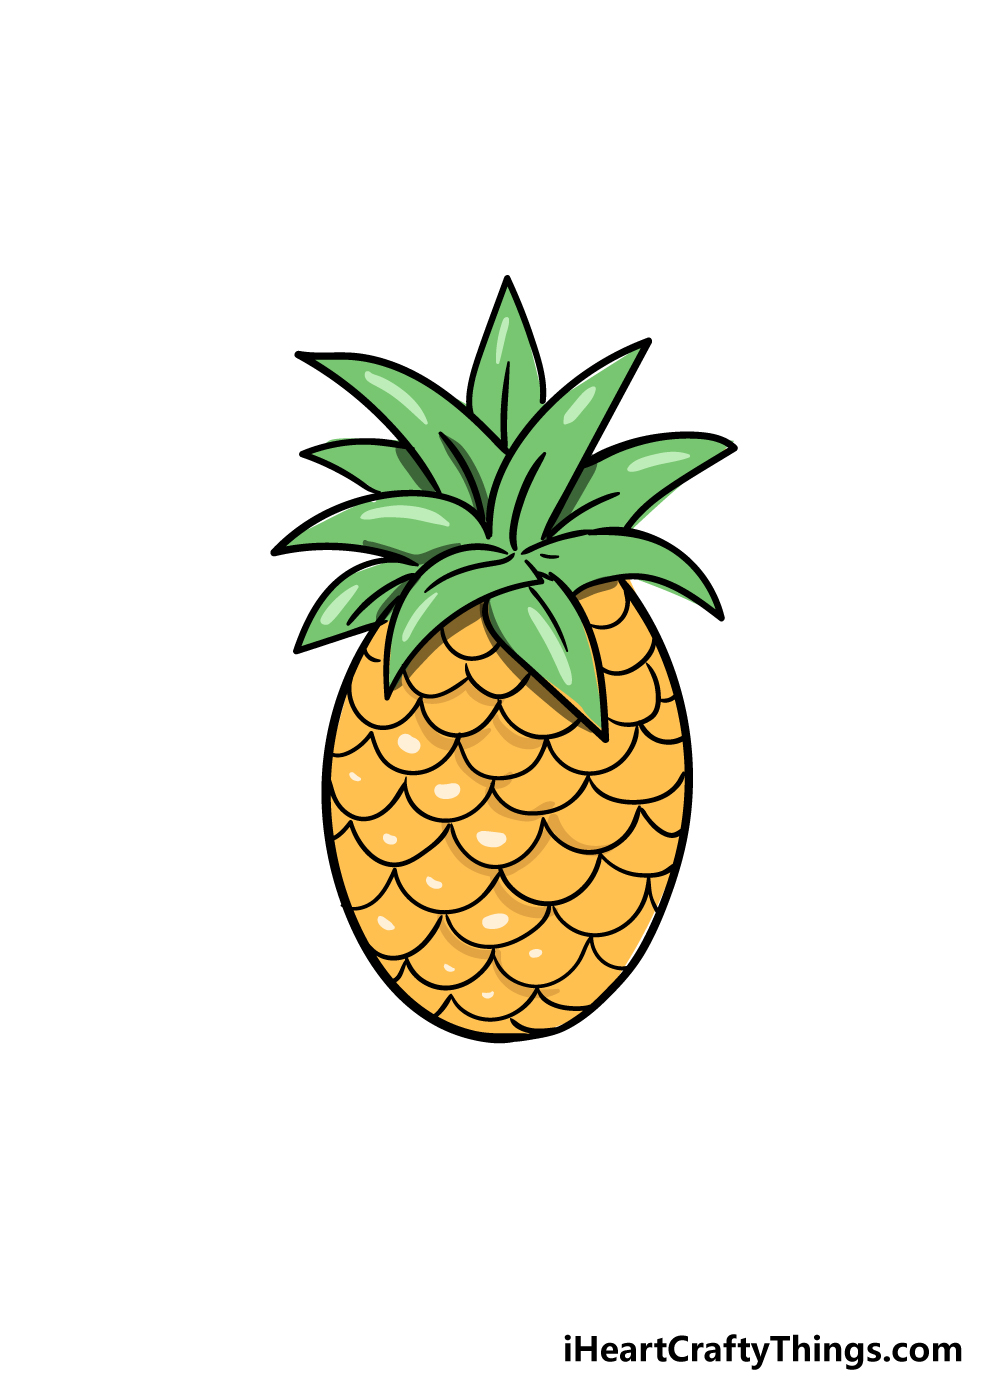  Pineapple Drawing - How To Draw A Pineapple Step By Step